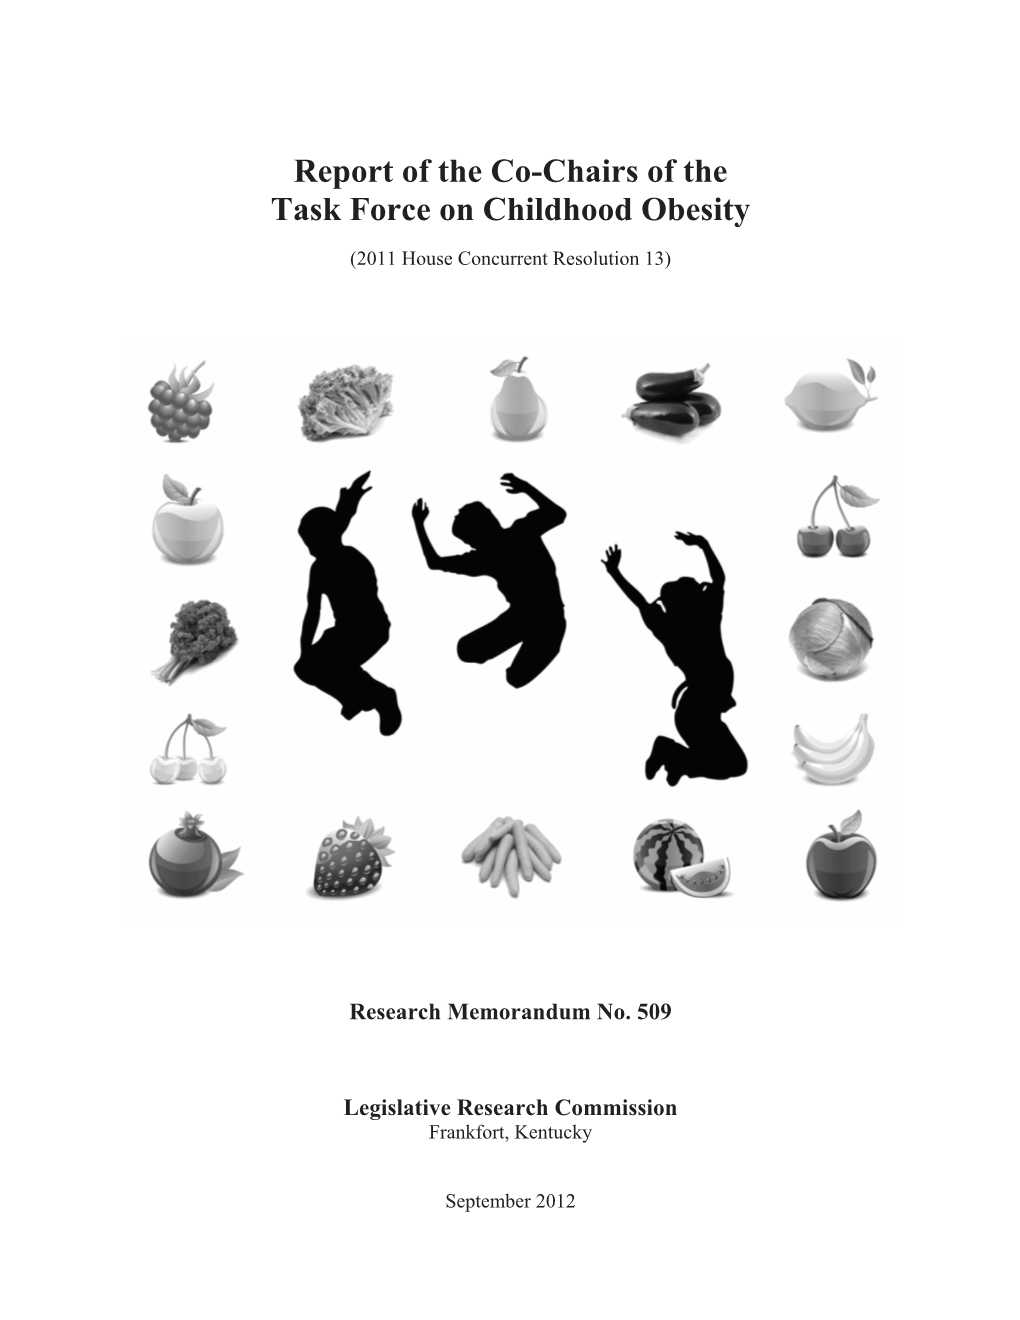 Report of the Co-Chairs of the Task Force on Childhood Obesity